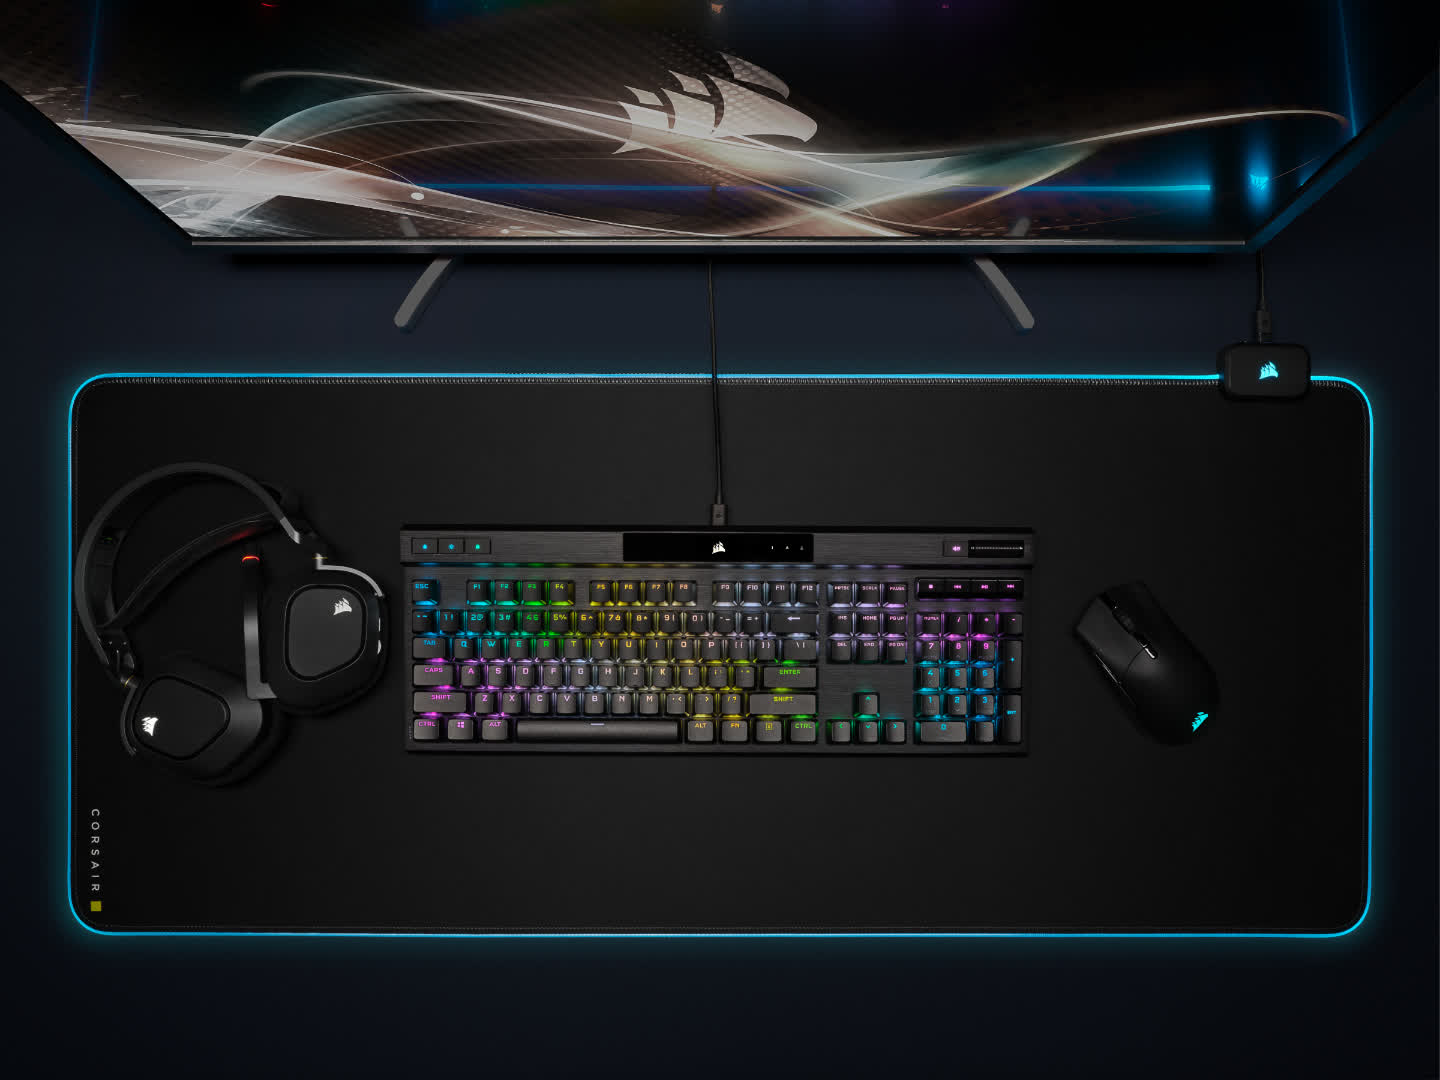 Corsair's updated K70 RGB Pro keyboard features an 8,000 Hz polling rate, detachable USB-C cable